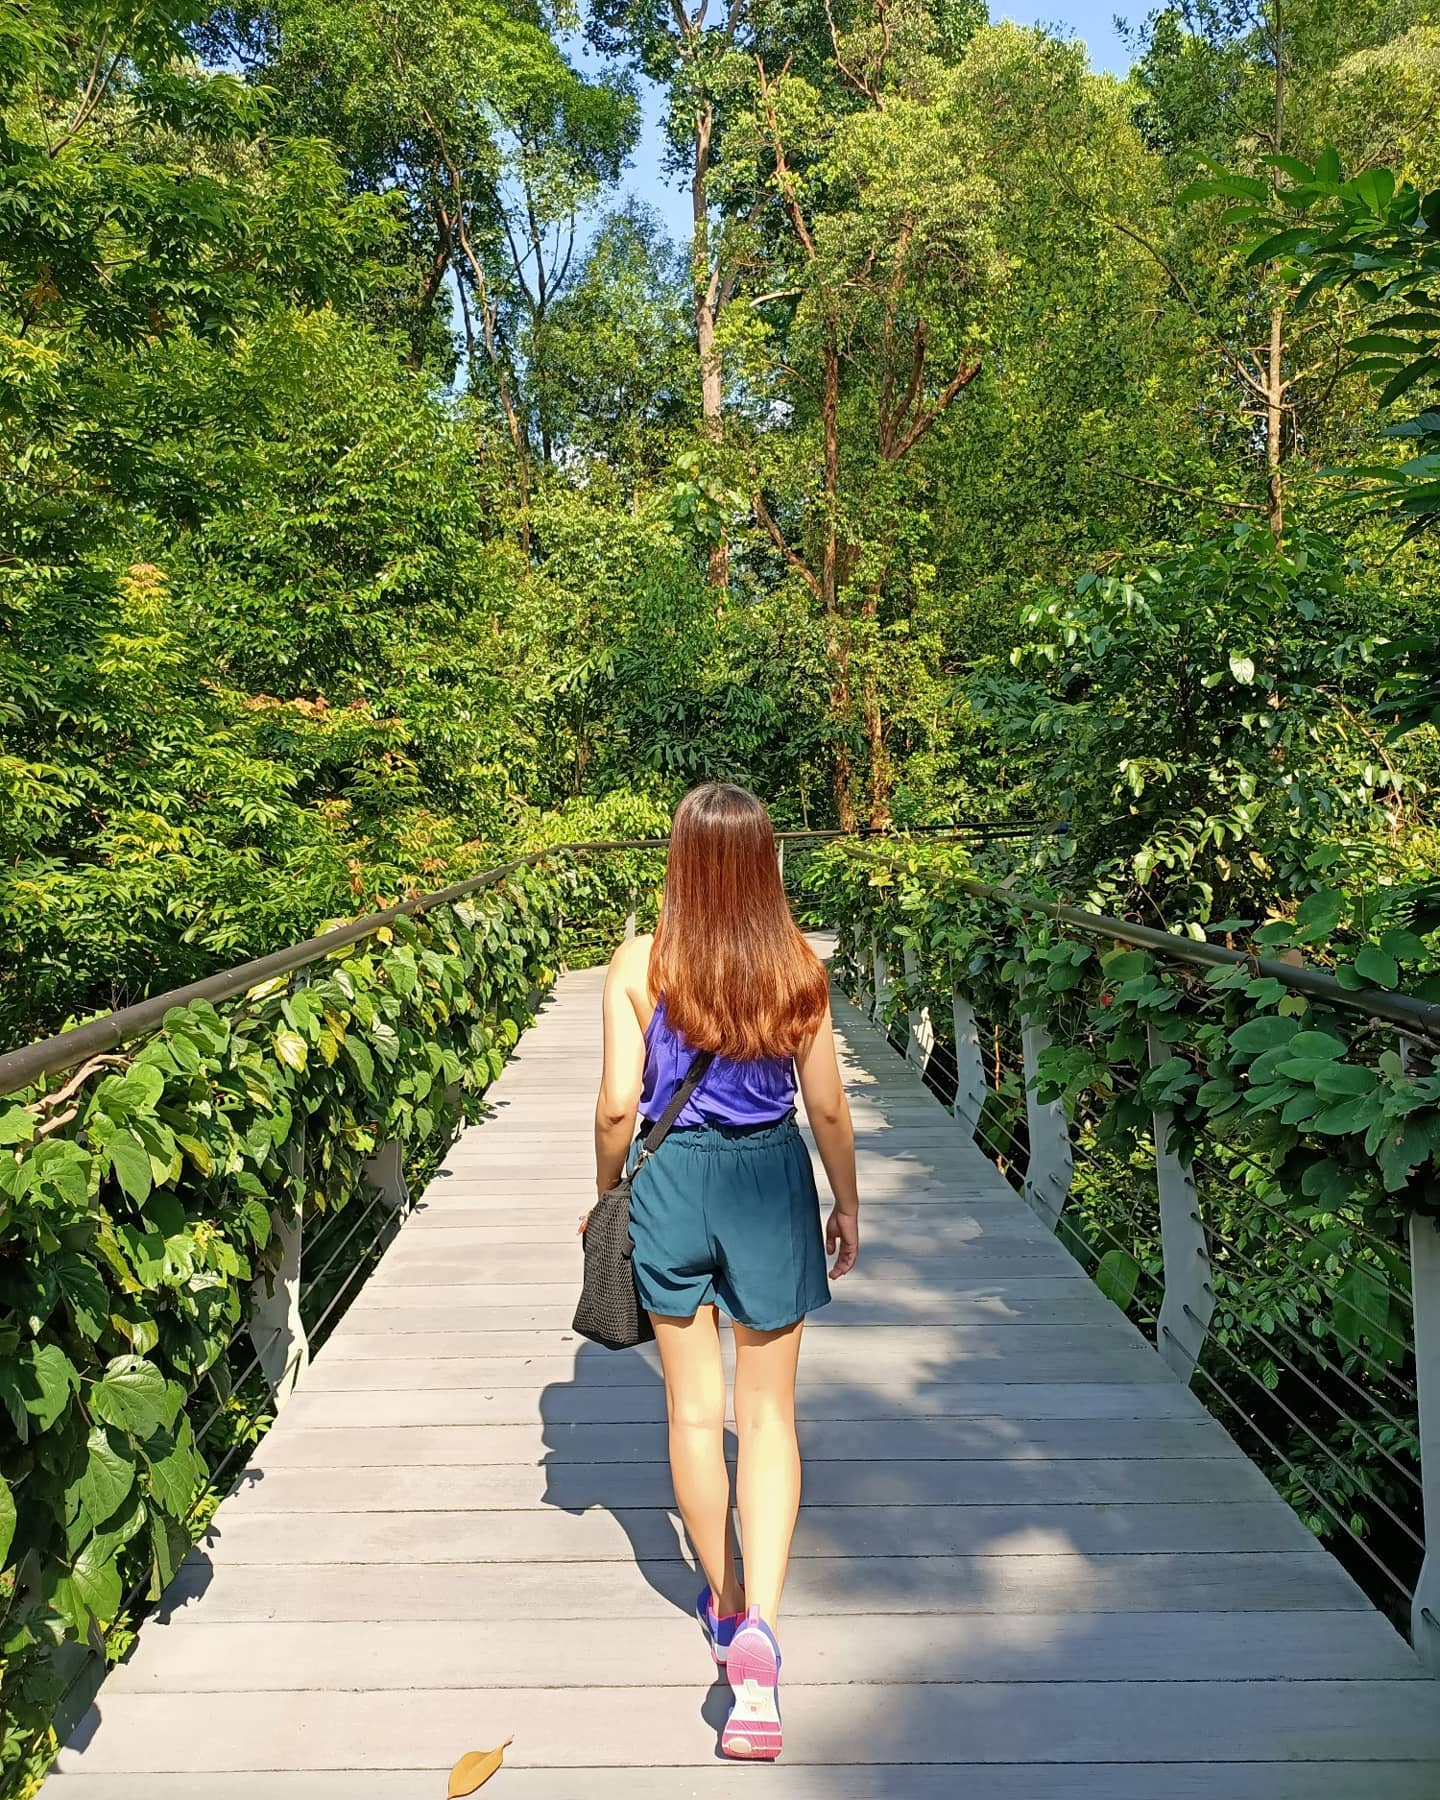 hiking trails in Singapore - Canopy Trail